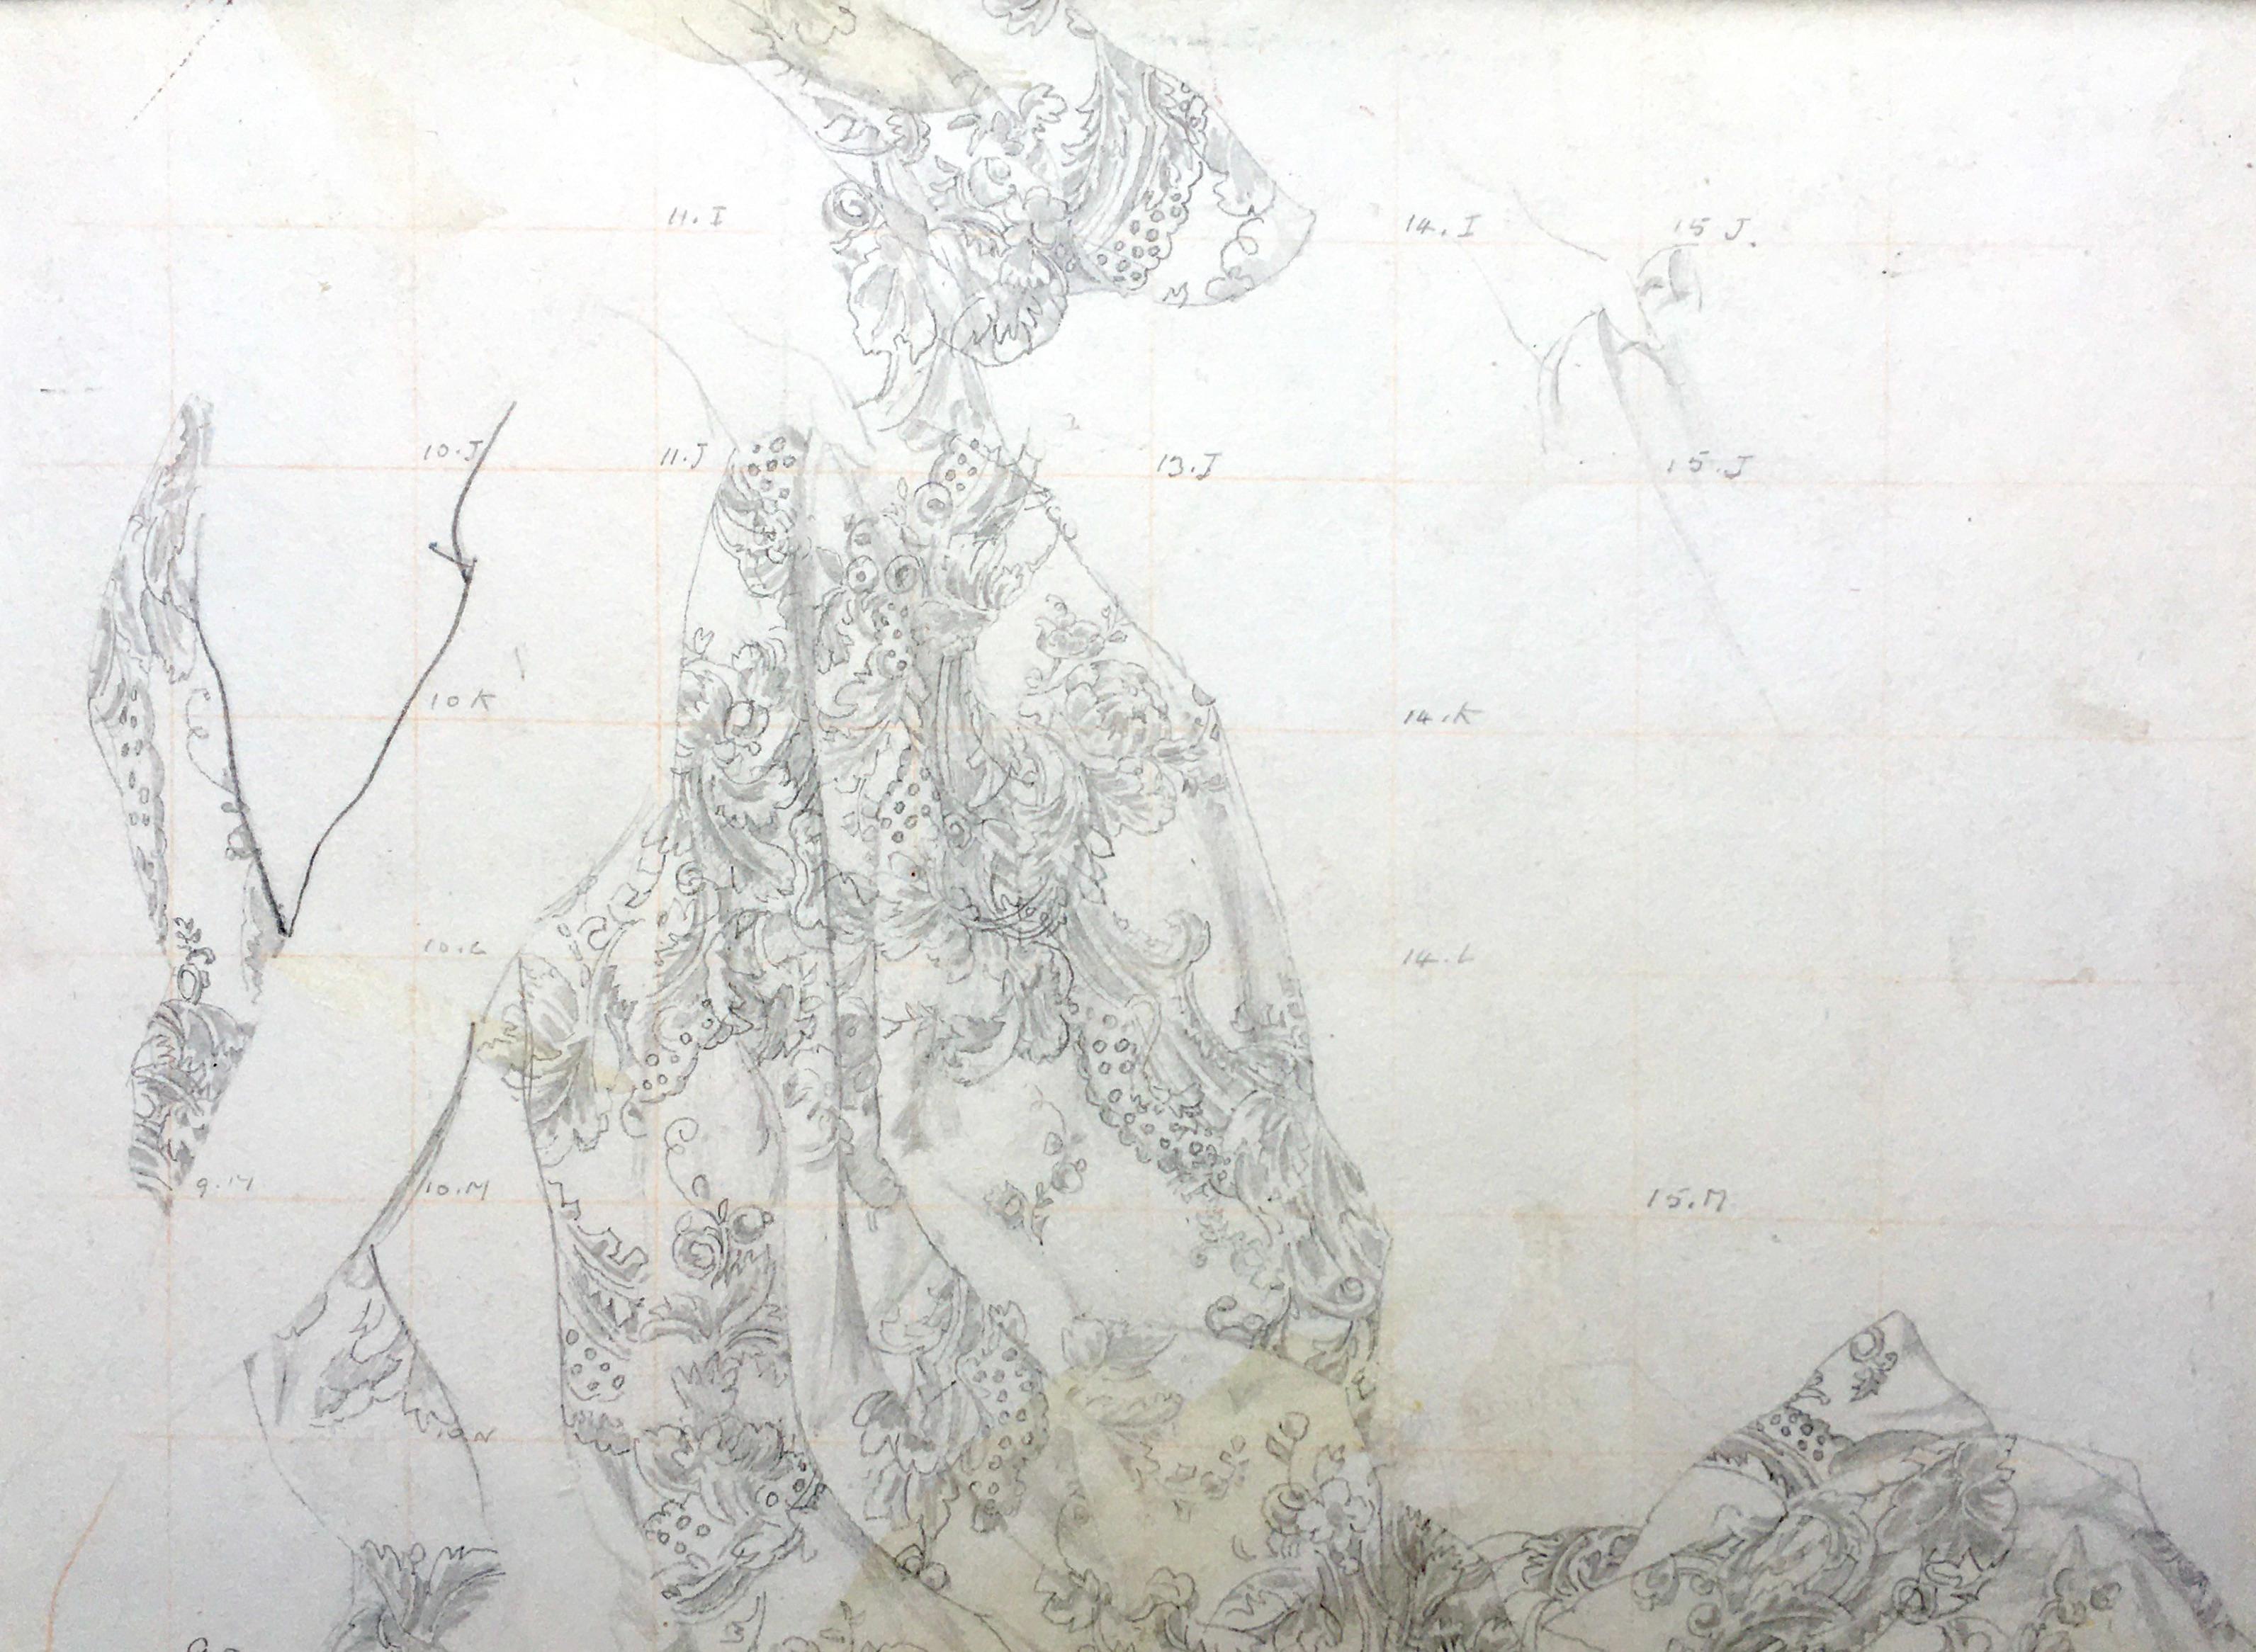 CHARLES SIMS, RA, RWS, RSW
(1873-1928)

Drapery Study for the Royal Academy Arts & Crafts Mural

Pencil, squared for transfer
Unframed, in conservation mount

17.5 by 24 cm., 7 by 9 ½ in.
(mount size 33.5 by 39 cm., 9 by 15 ¼